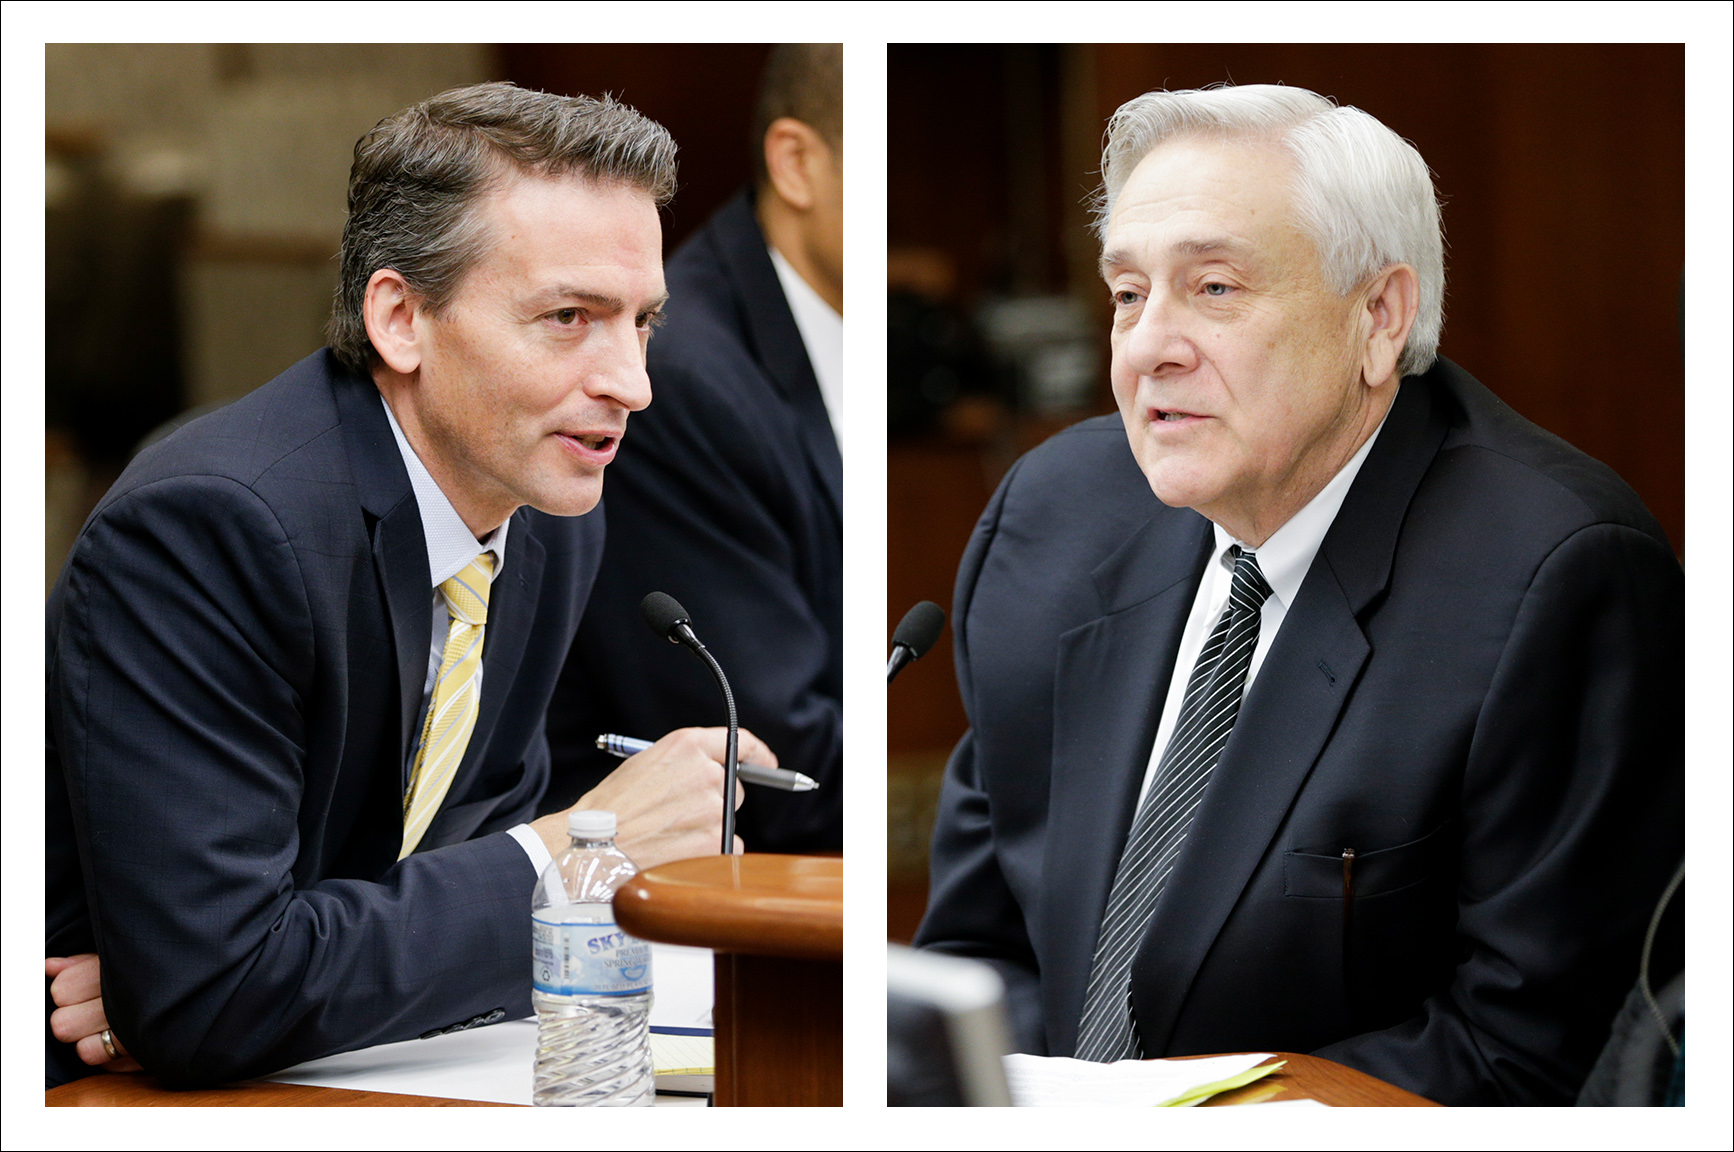 Ed Graff, left, superintendent of Minneapolis Schools, and John Thein, superintendent of St. Paul Schools, comment about student misconduct and disciplinary issues before the House Education Innovation and Policy Committee Feb. 9. Phot by Paul Battaglia